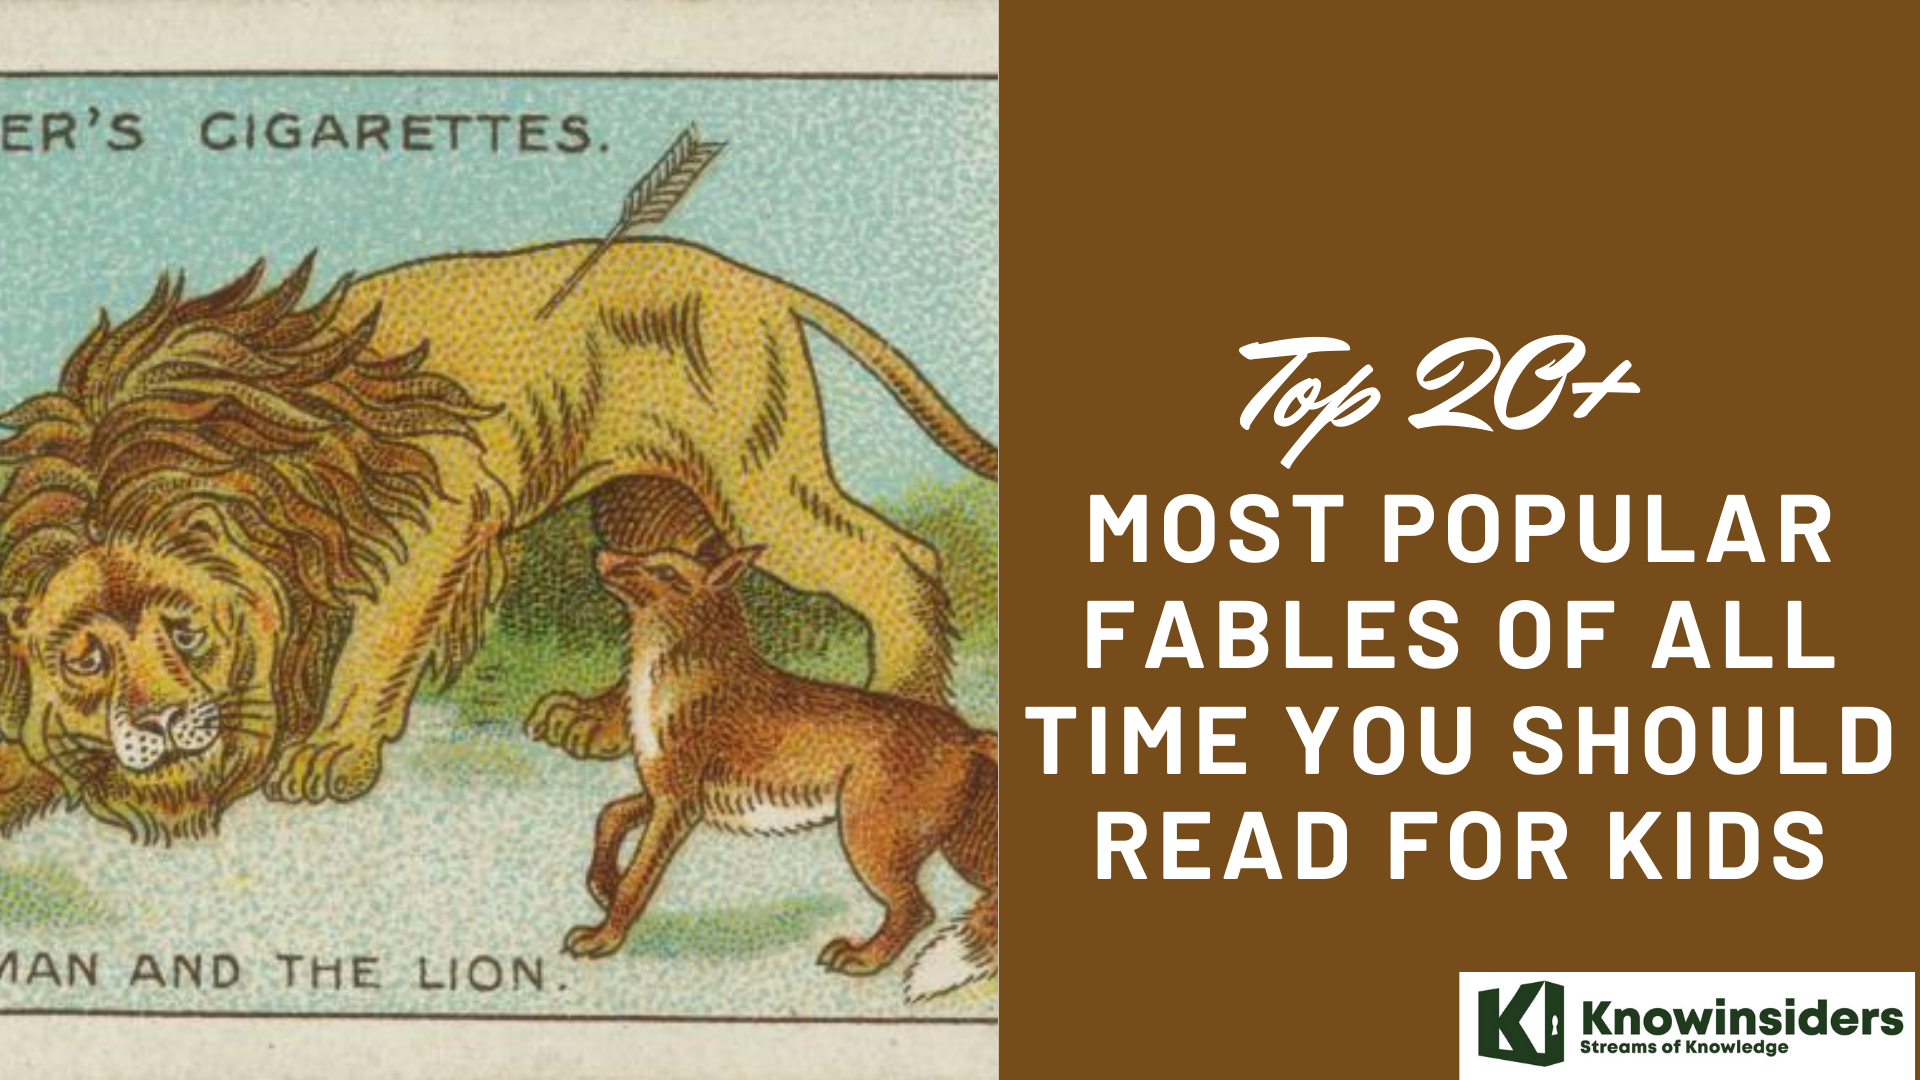 Top 20+ Most Popular Fables and Lesson of All Time You Should Read For Kids